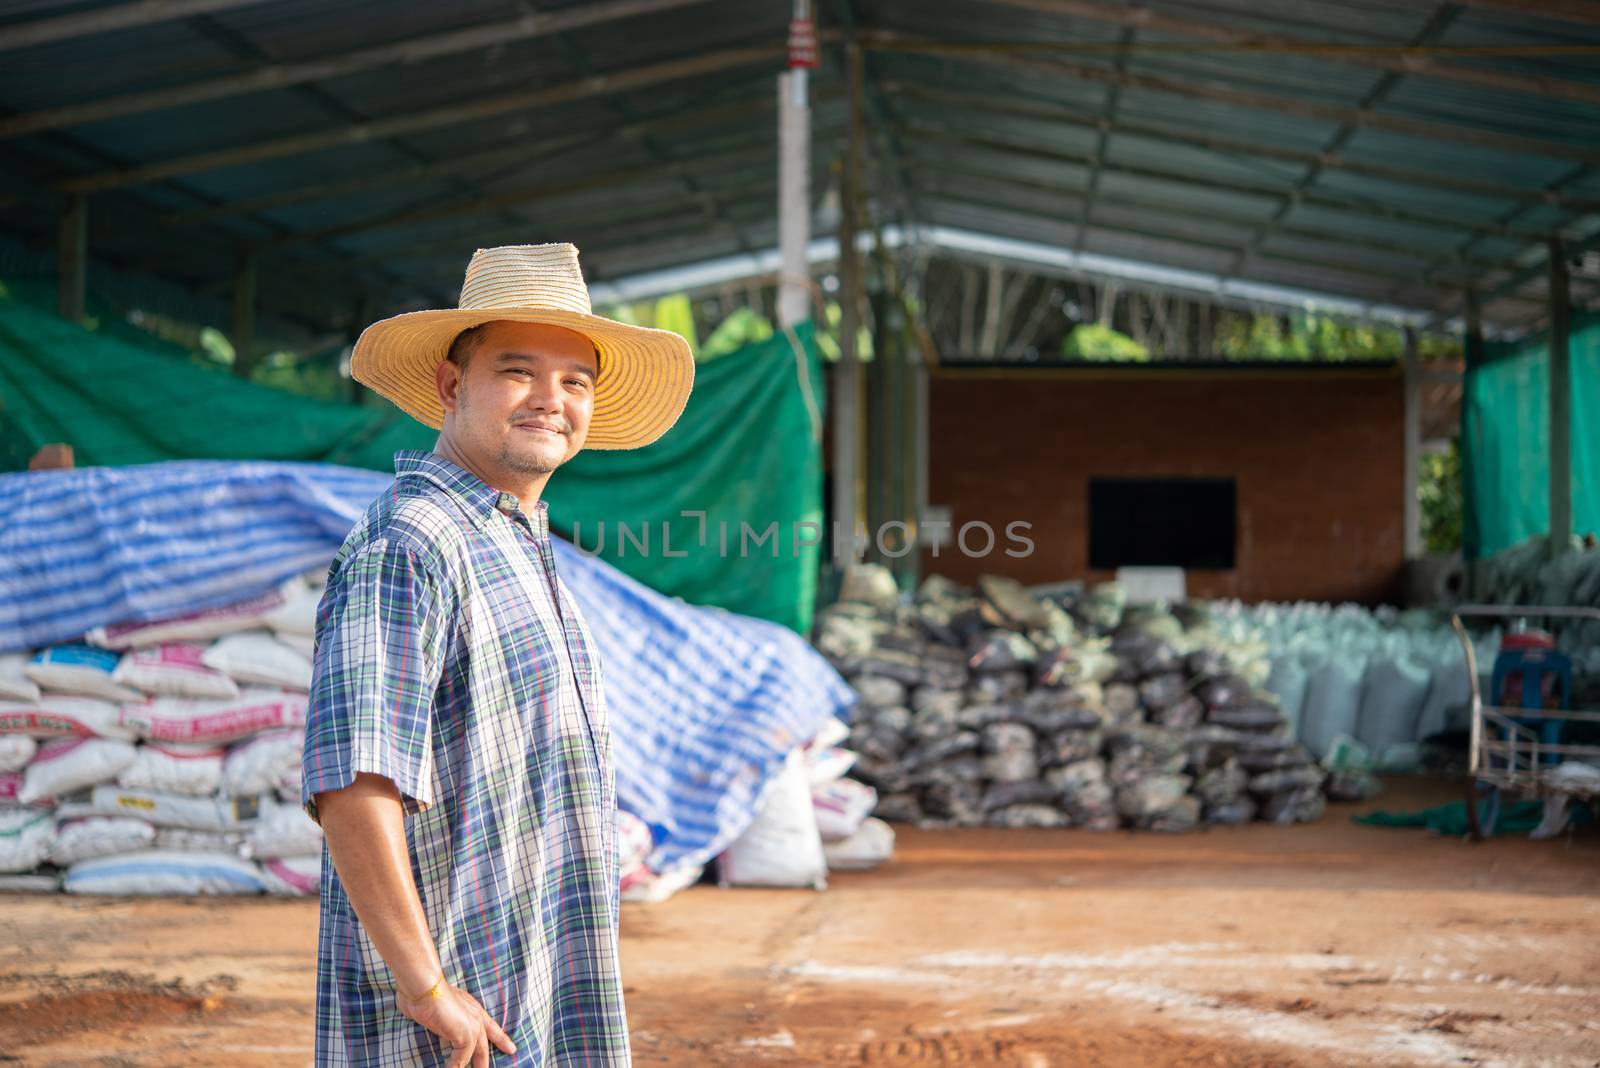 Asian man farmer agriculturist happy at a Fertilizer composting plant with Organic Fertilizer, Compost (Aerobic Microorganisms) from animal waste for use in the organic agriculture industry